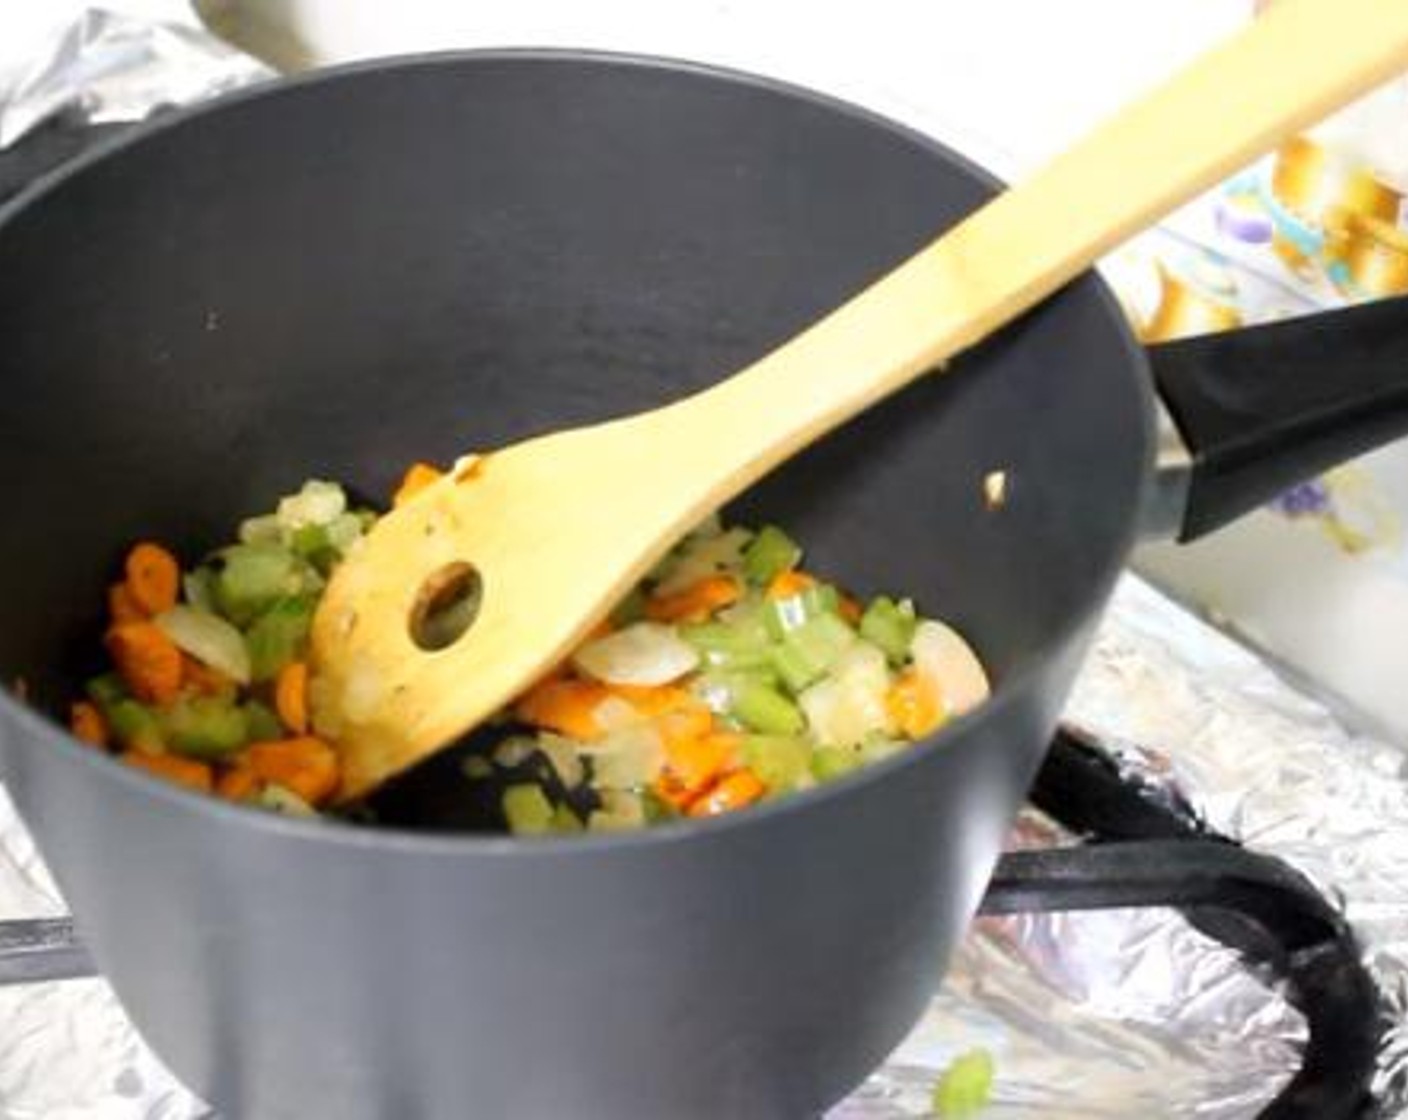 step 3 Into a cooking pan, add the Extra-Virgin Olive Oil (2 Tbsp), Butter (1/4 cup) Onion (1 cup), Carrot (2/3 cup), Celery (2/3 cup), Salt (1/2 tsp), and Freshly Ground Black Pepper (to taste). Give the mixture a gentle stir and cook for about 5 minutes.